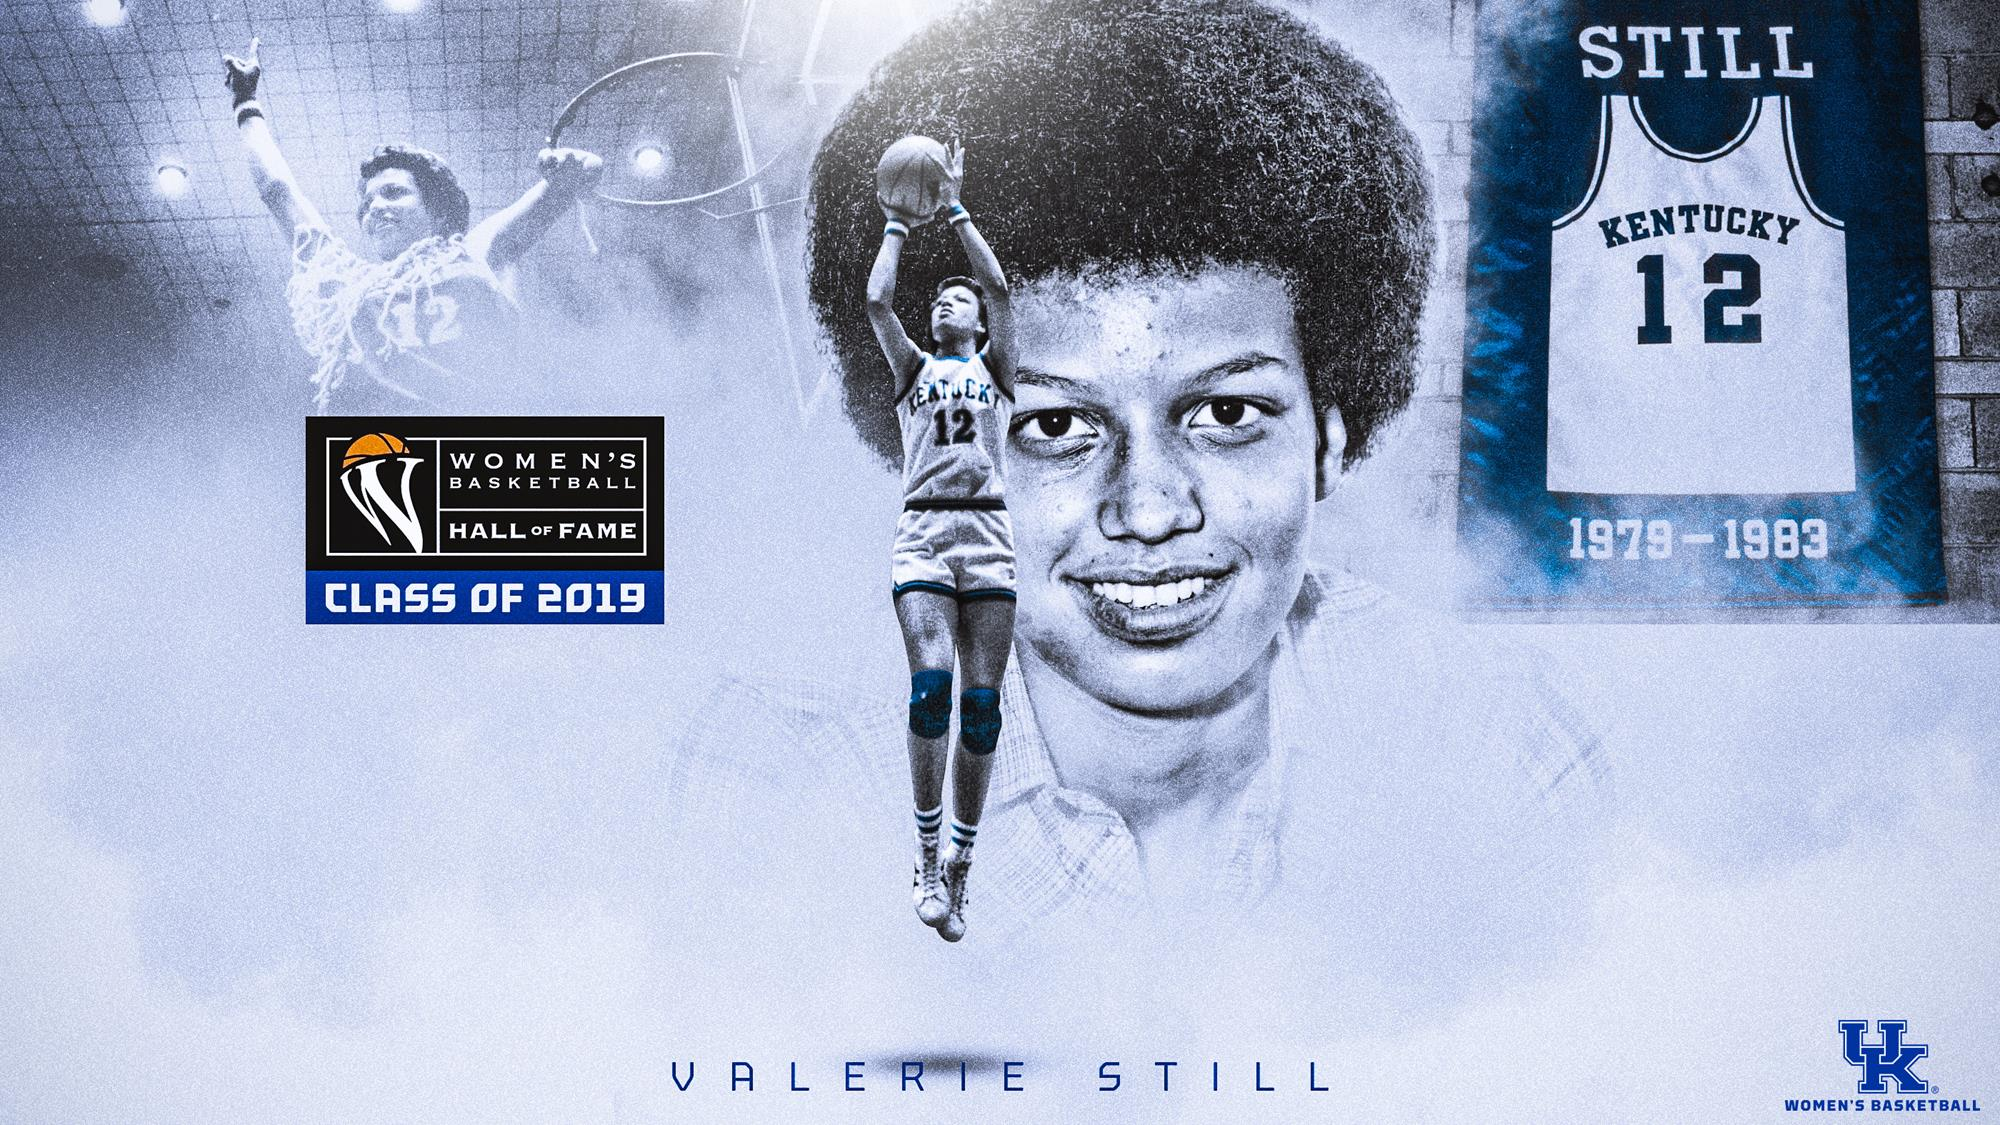 Valerie Still Named to WBB Hall of Fame Class of 2019